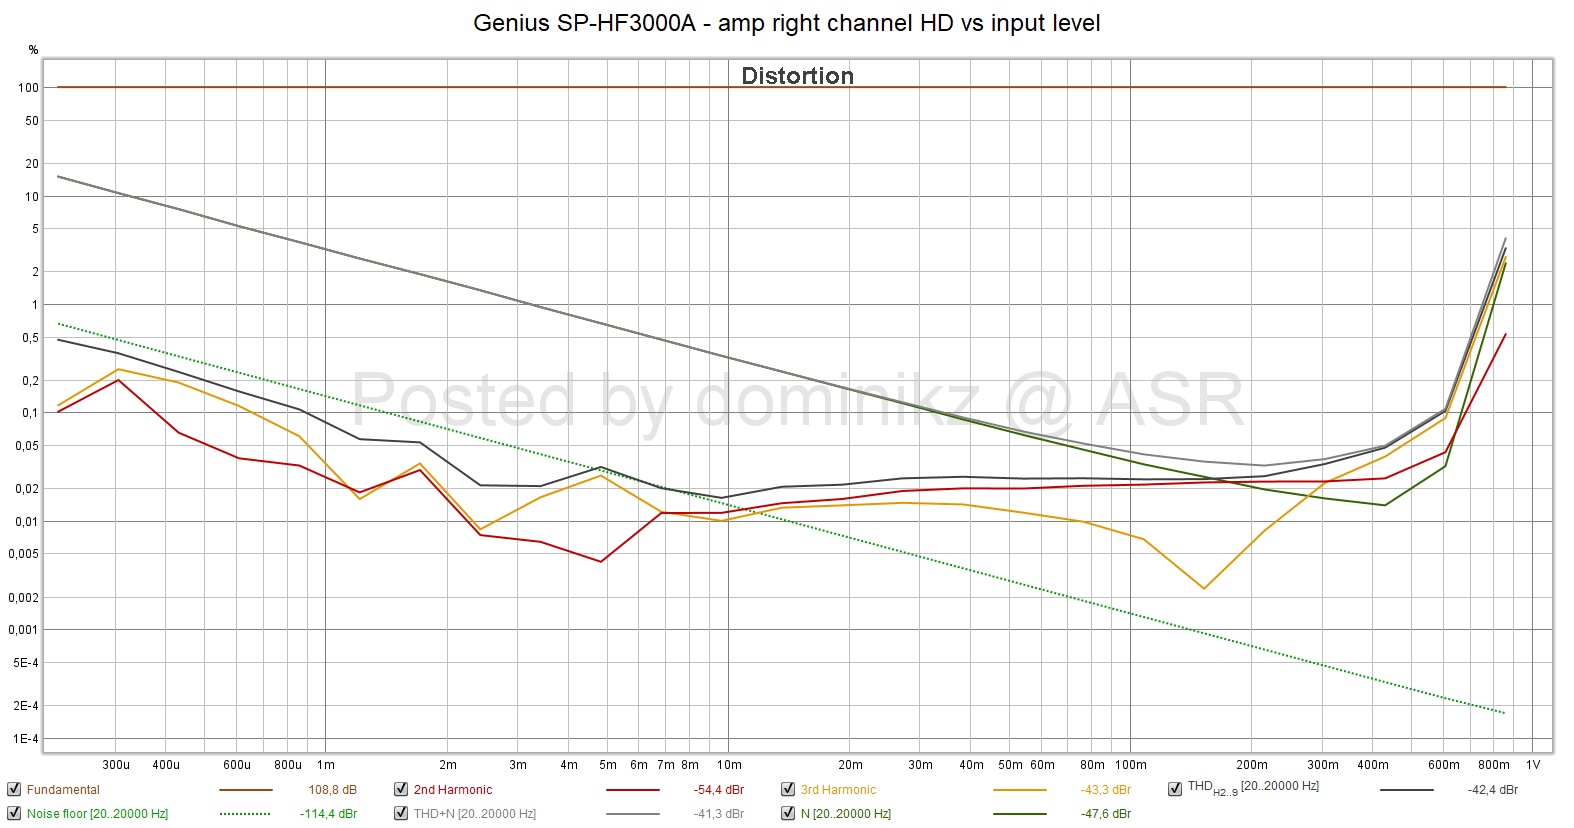 Genius SP-HF3000A - amp right channel HD vs input level.jpg